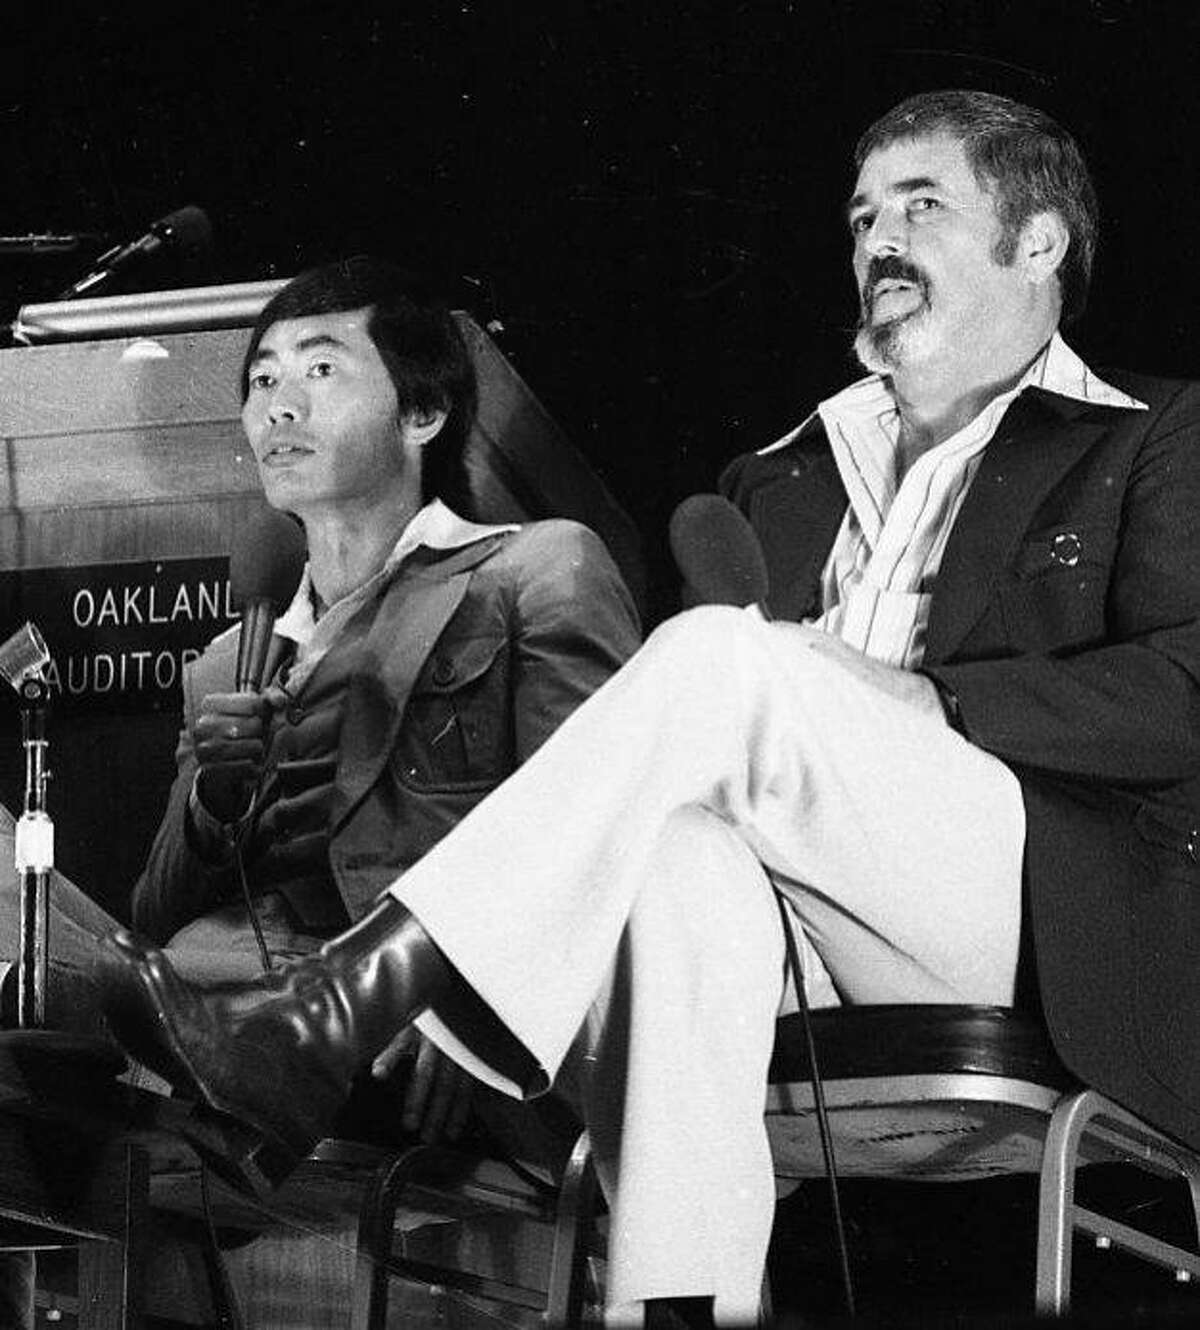 George Takei and James Doohan at the "Star Trek" convention in Oakland, Aug. 8, 1976.